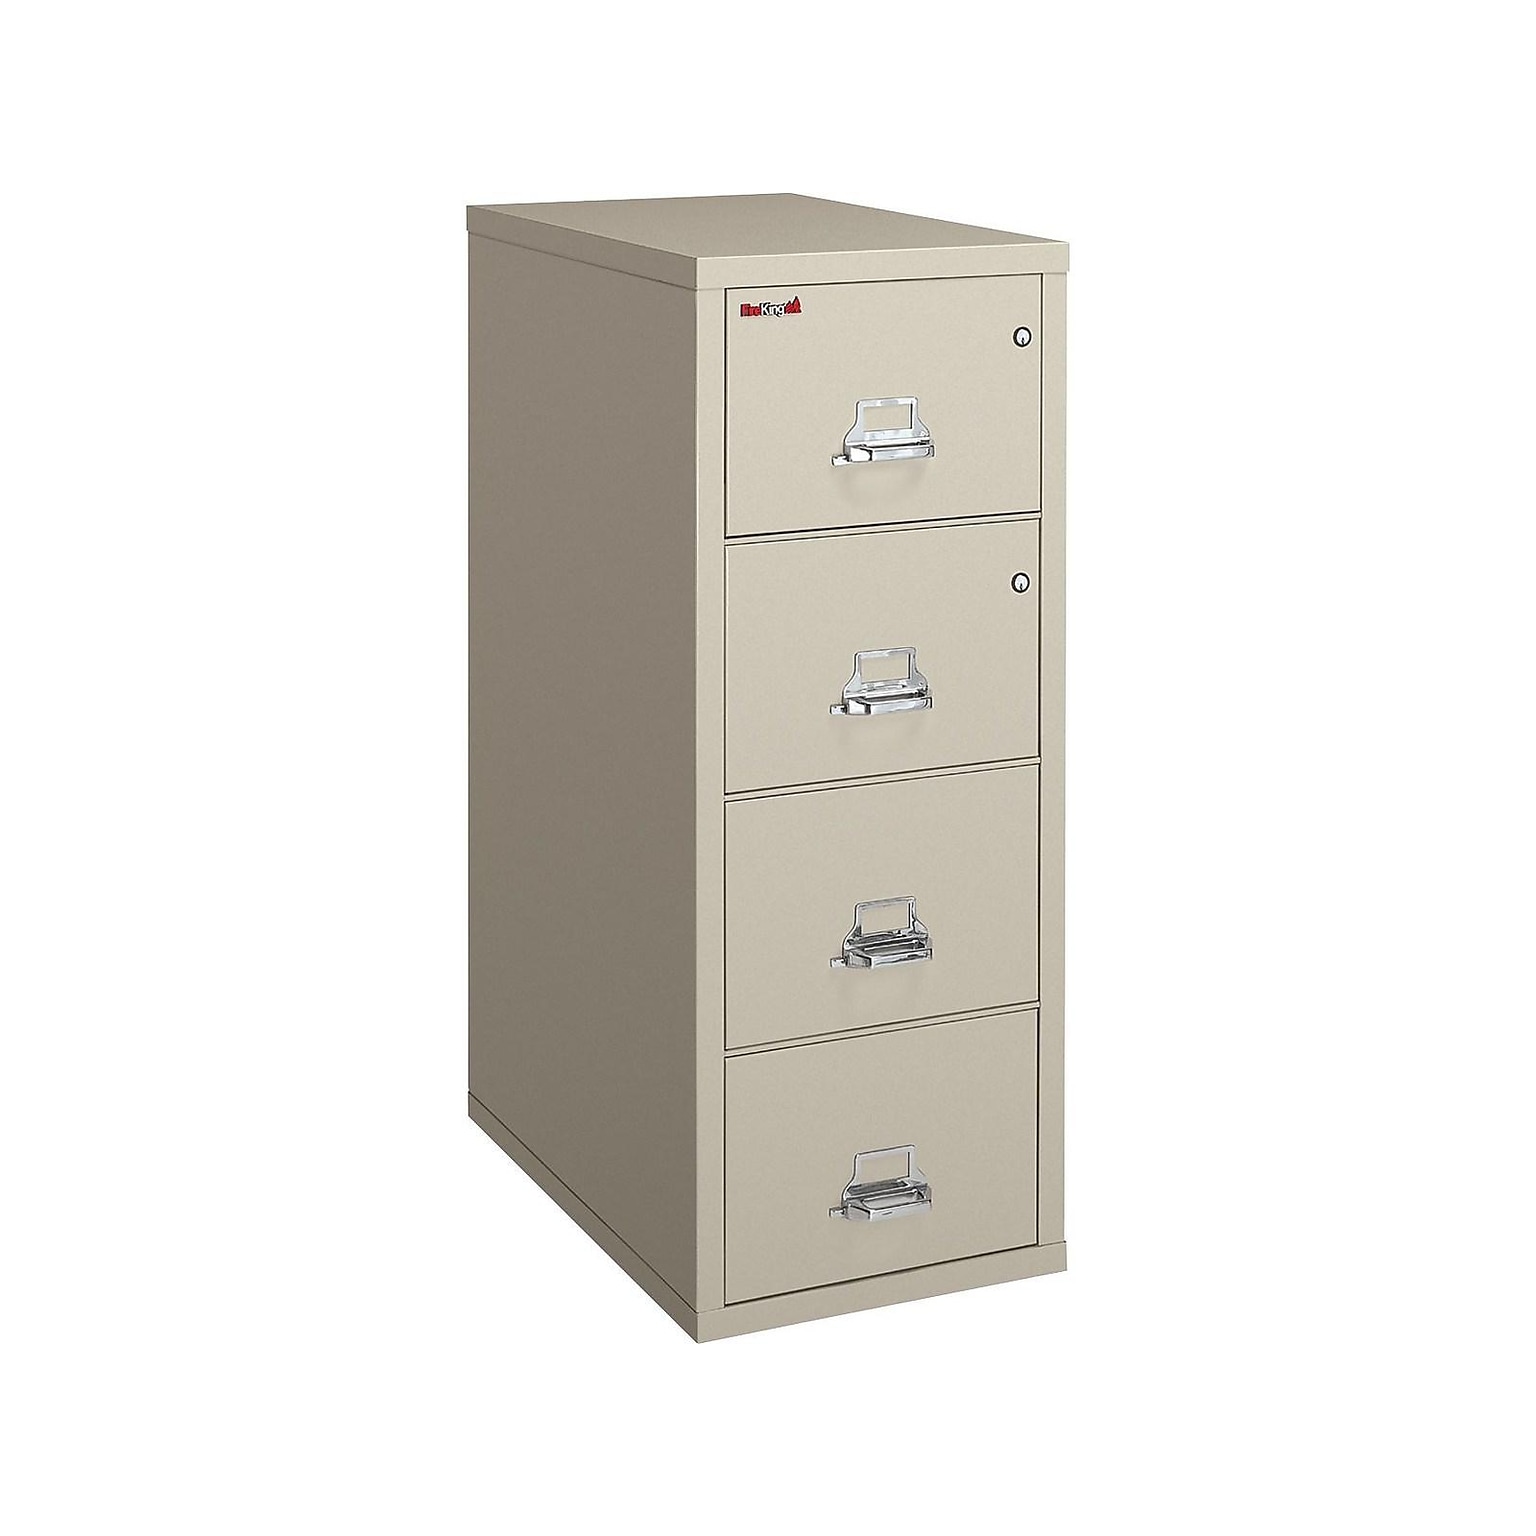 FireKing Classic 4-Drawer Vertical File Cabinet, Fire Resistant, Letter, Parchment, 31.56D (4-1831-CPA)